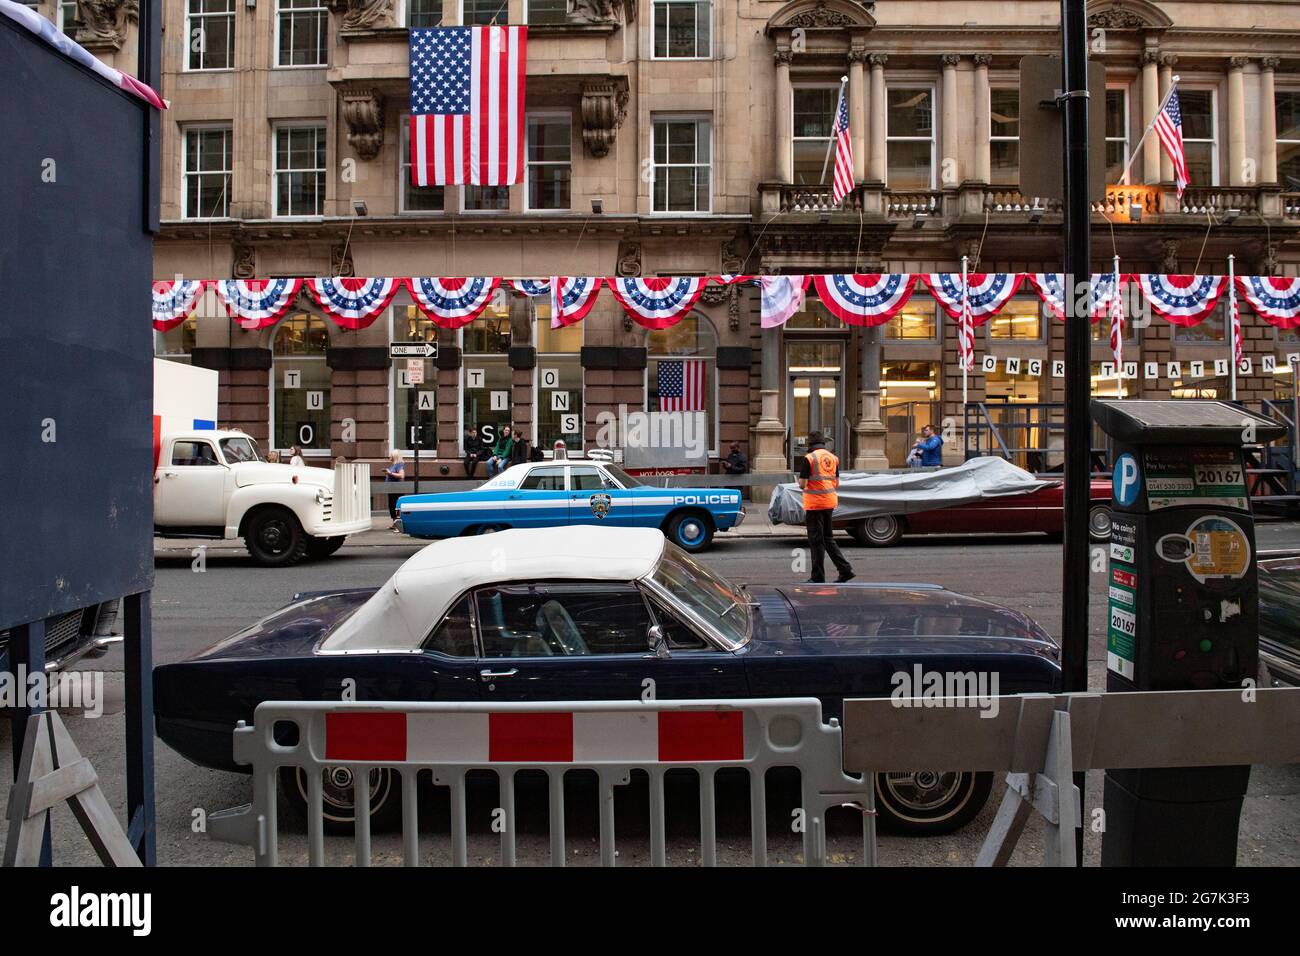 Glasgow, Scotland, UK. 14th July, 2021. PICTURED: Day 2 of filming of Hollywood blockbuster movie of Indiana Jones 5. Police cars, yellow taxi cabs and the presidential car are in the street. The centre of Glasgow city centre has been turned into a 1960s New York City scene, with masses of American flags and stars and stripes bunting hanging from the buildings, shop fronts and signage which include the street furniture and lamp posts resembling the era. Credit: Colin Fisher/Alamy Live News Stock Photo